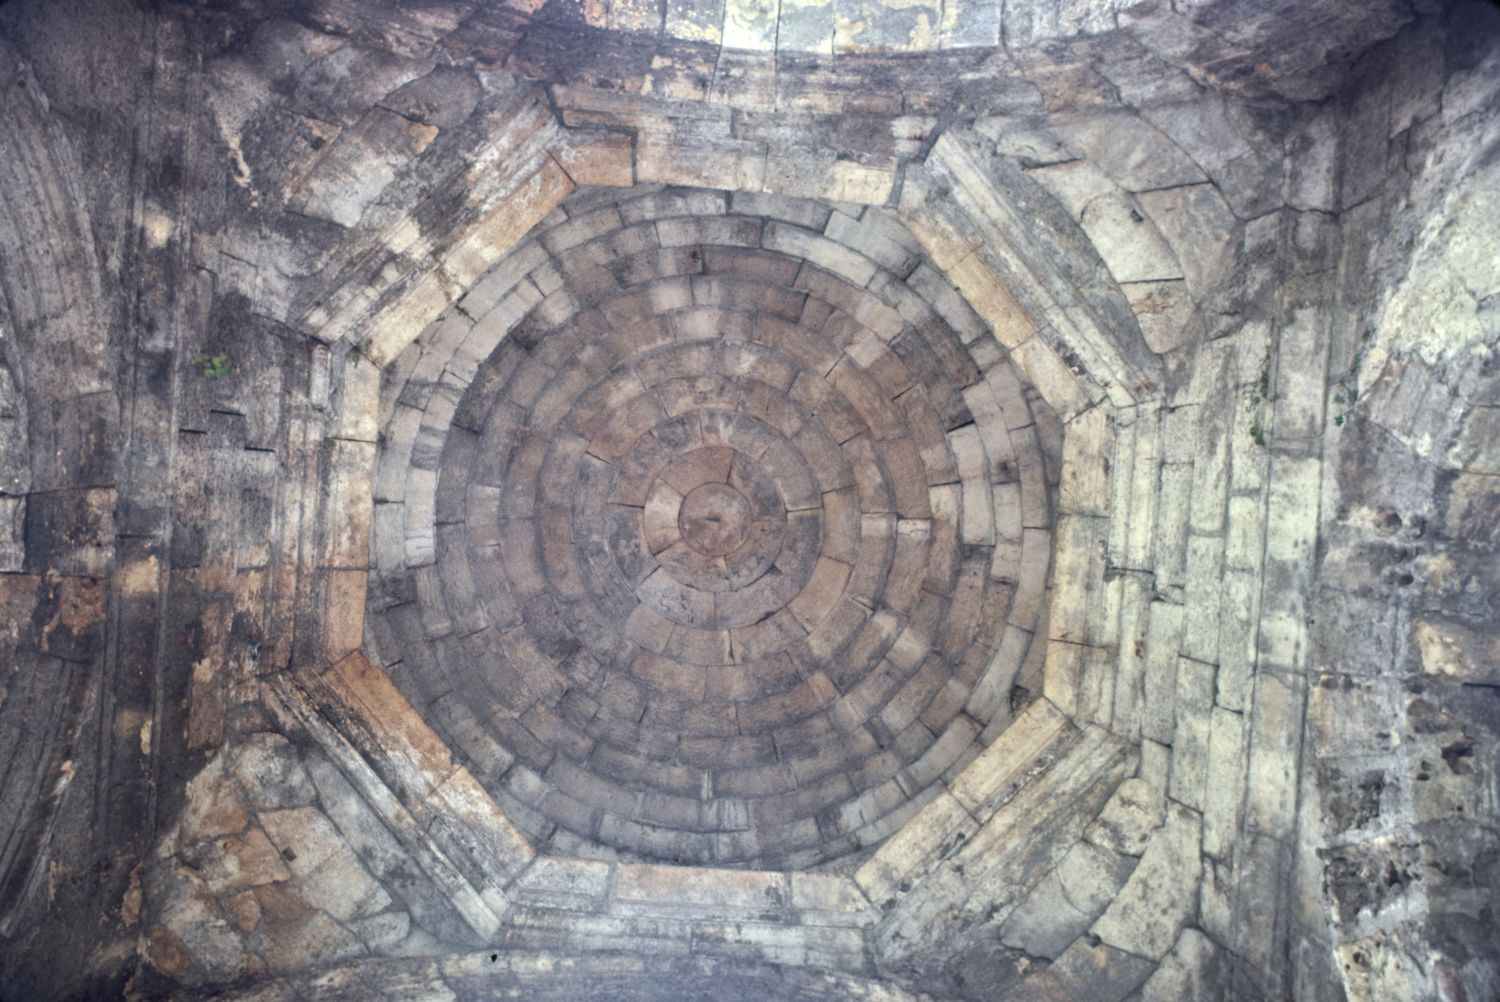 Interior view of domed ceiling.